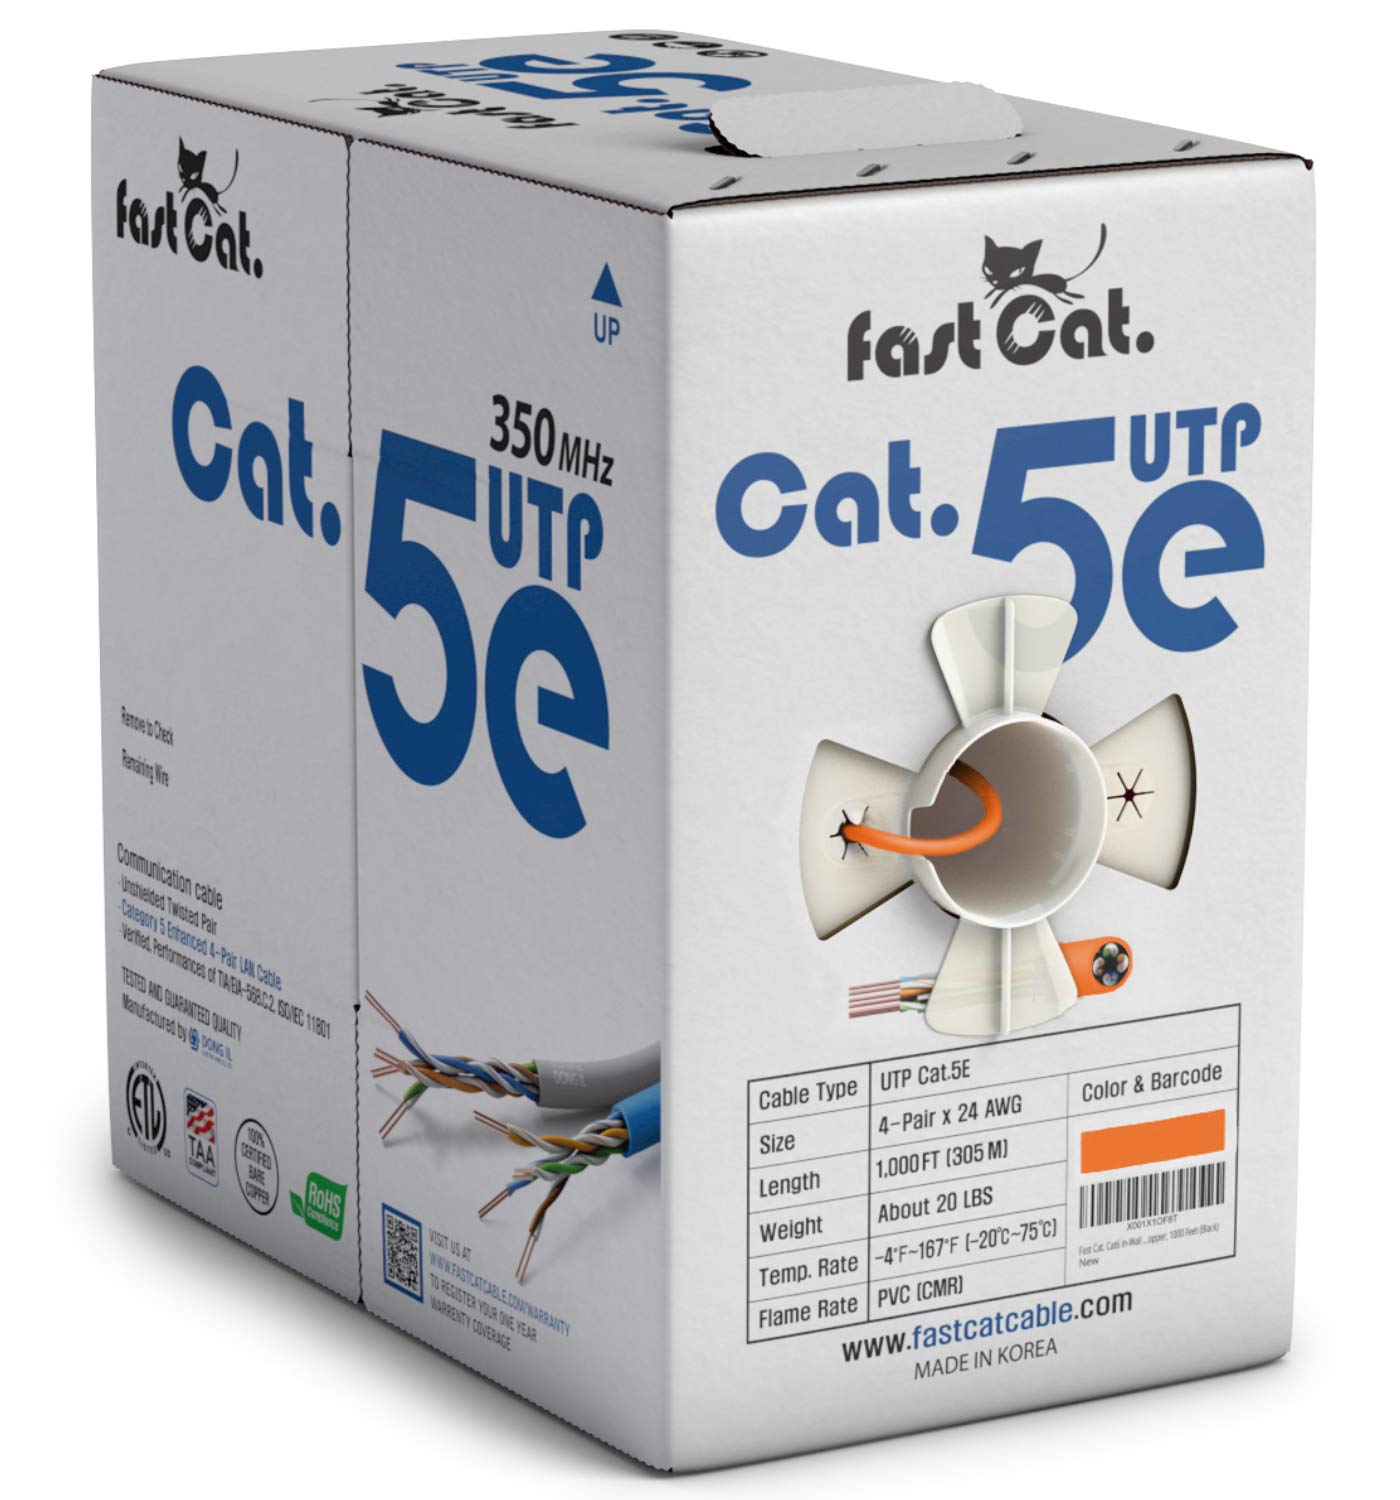 fast Cat. Cat5e Ethernet Cable 1000ft - 24 AWG, CMR, Insulated Bare Copper Wire Internet Cable with FastReel - 350MHZ / Gigabit Speed UTP LAN Cable - CMR (Orange)